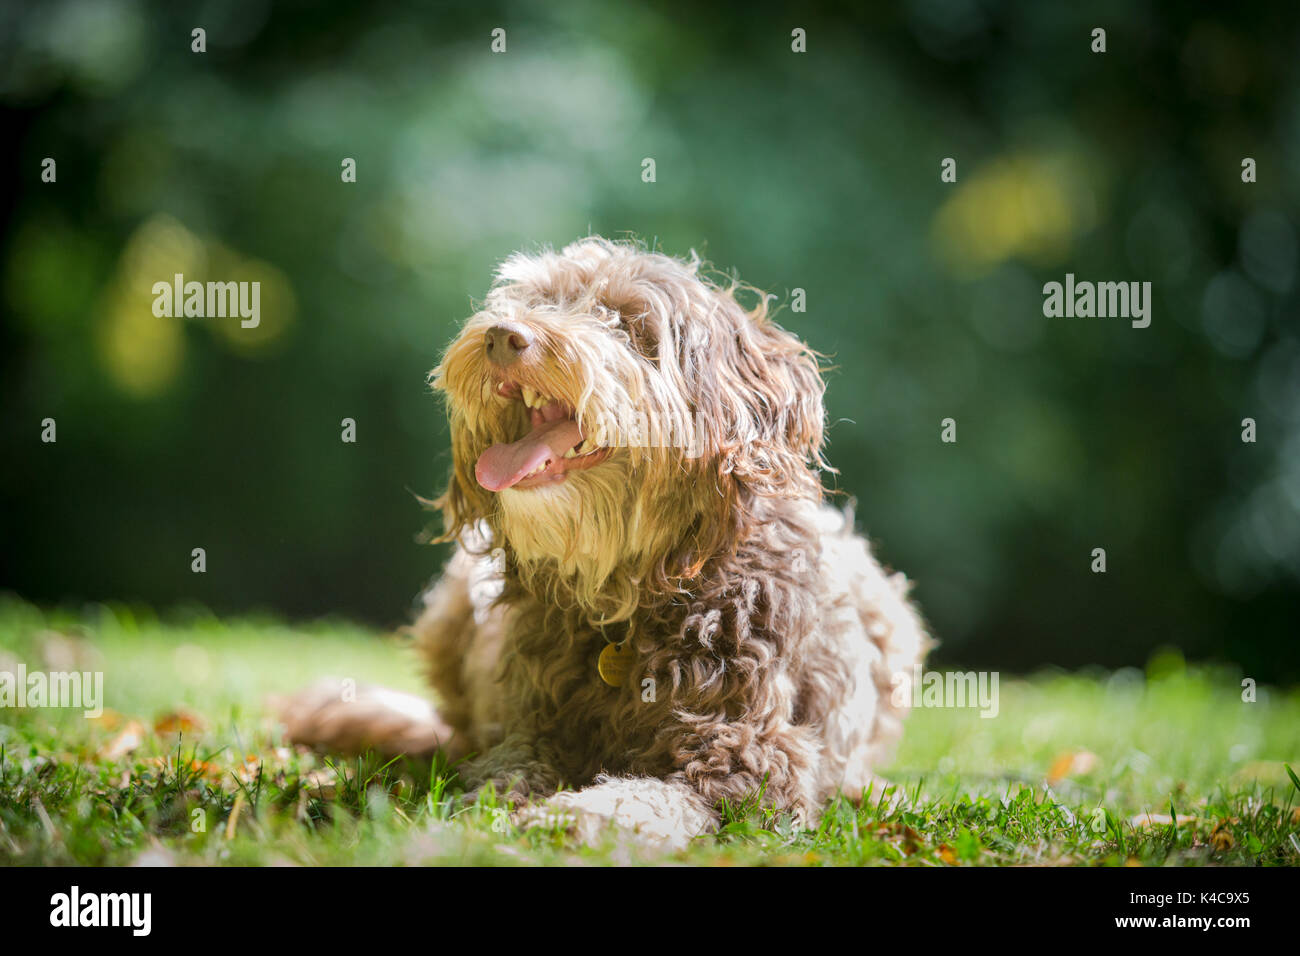 Mixed border collie and poodle dog lying on the grass in a park Stock Photo